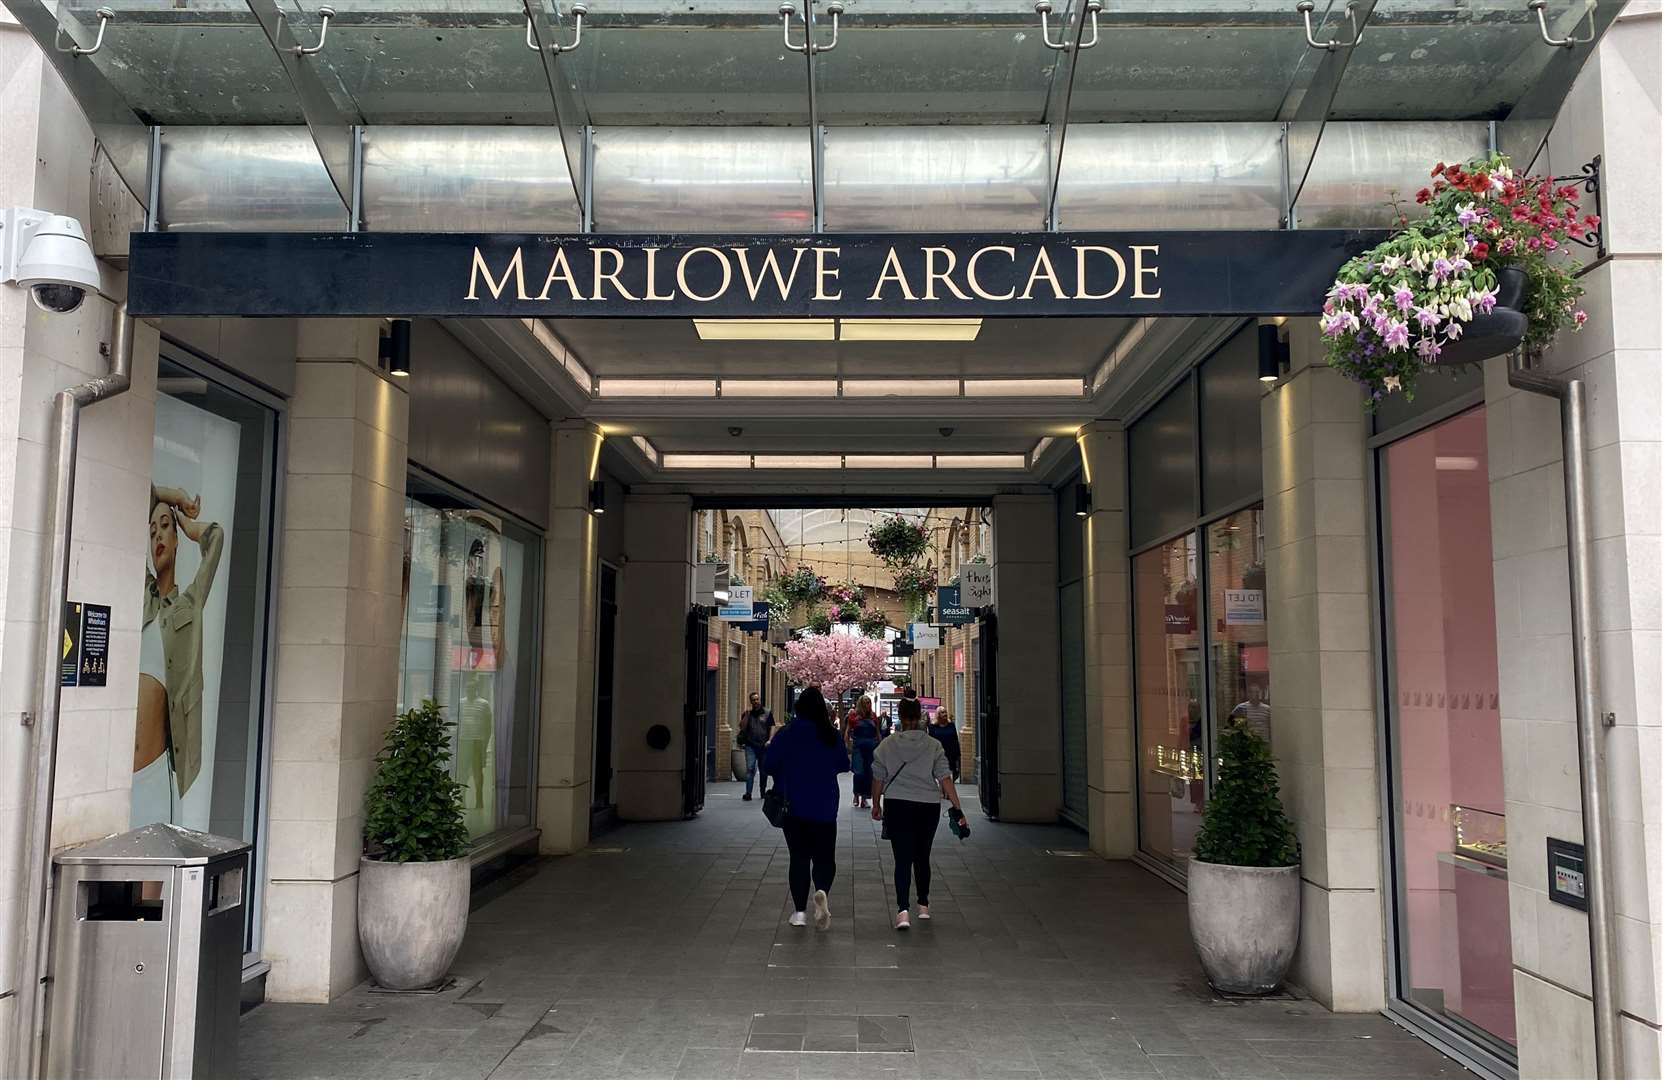 The Marlowe Arcade features a mix of independent stores and national chains